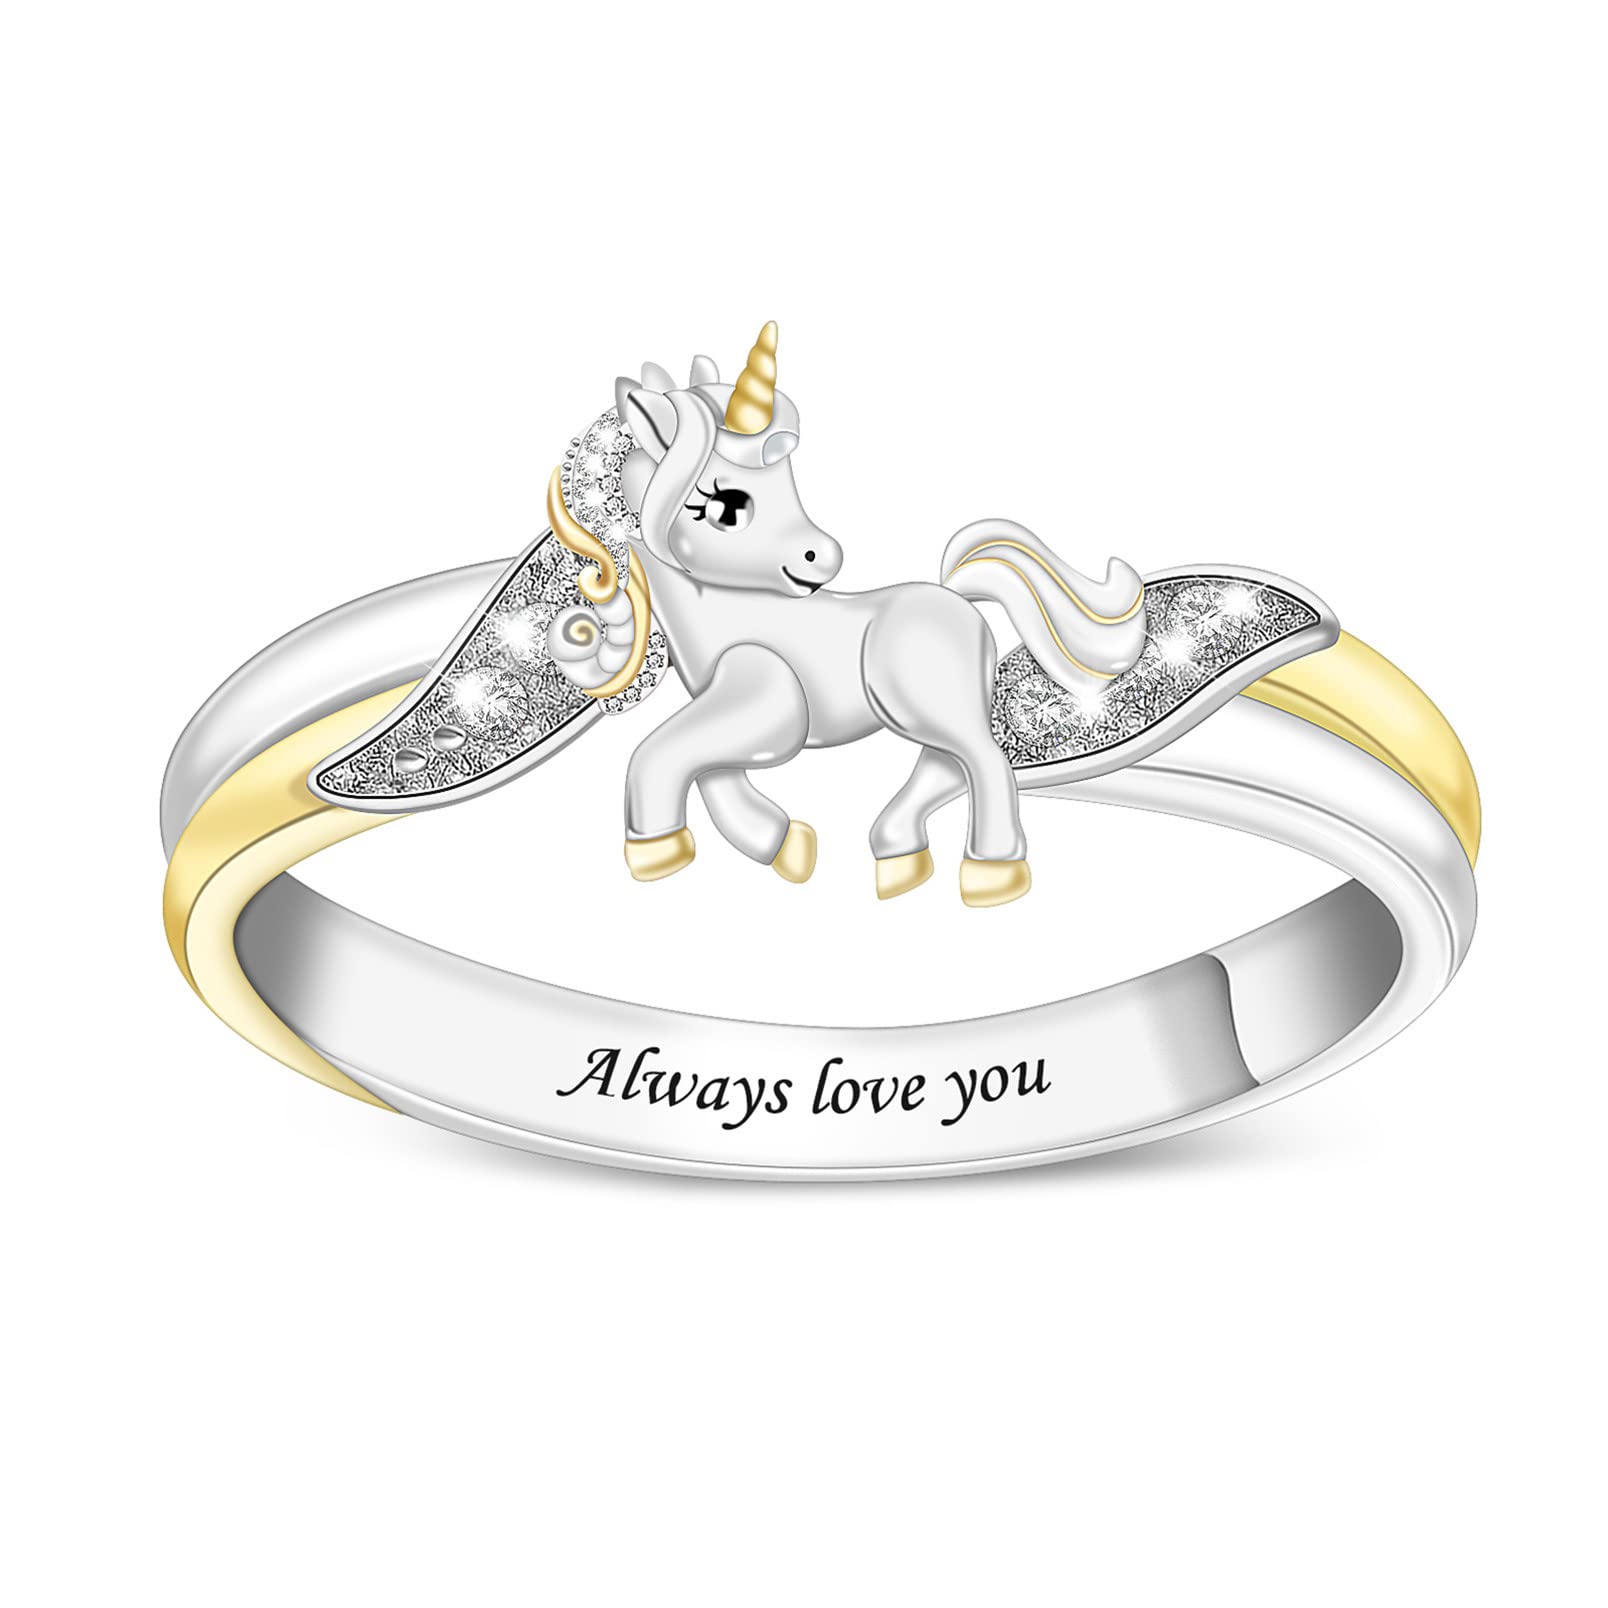 Personalized Unicorn Shaped Ring and Free Engraving-YITUB